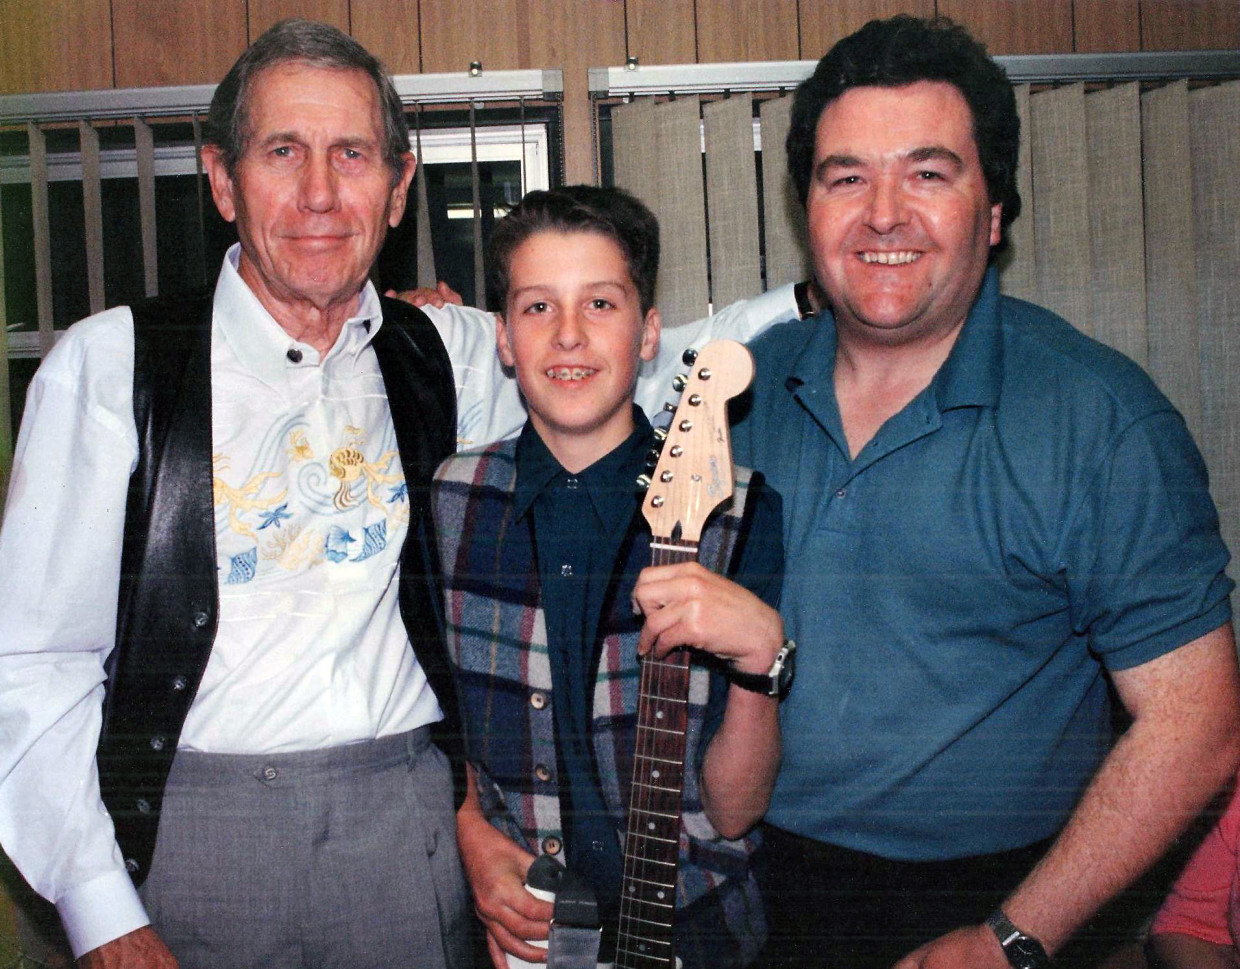 Chet, Peter and me